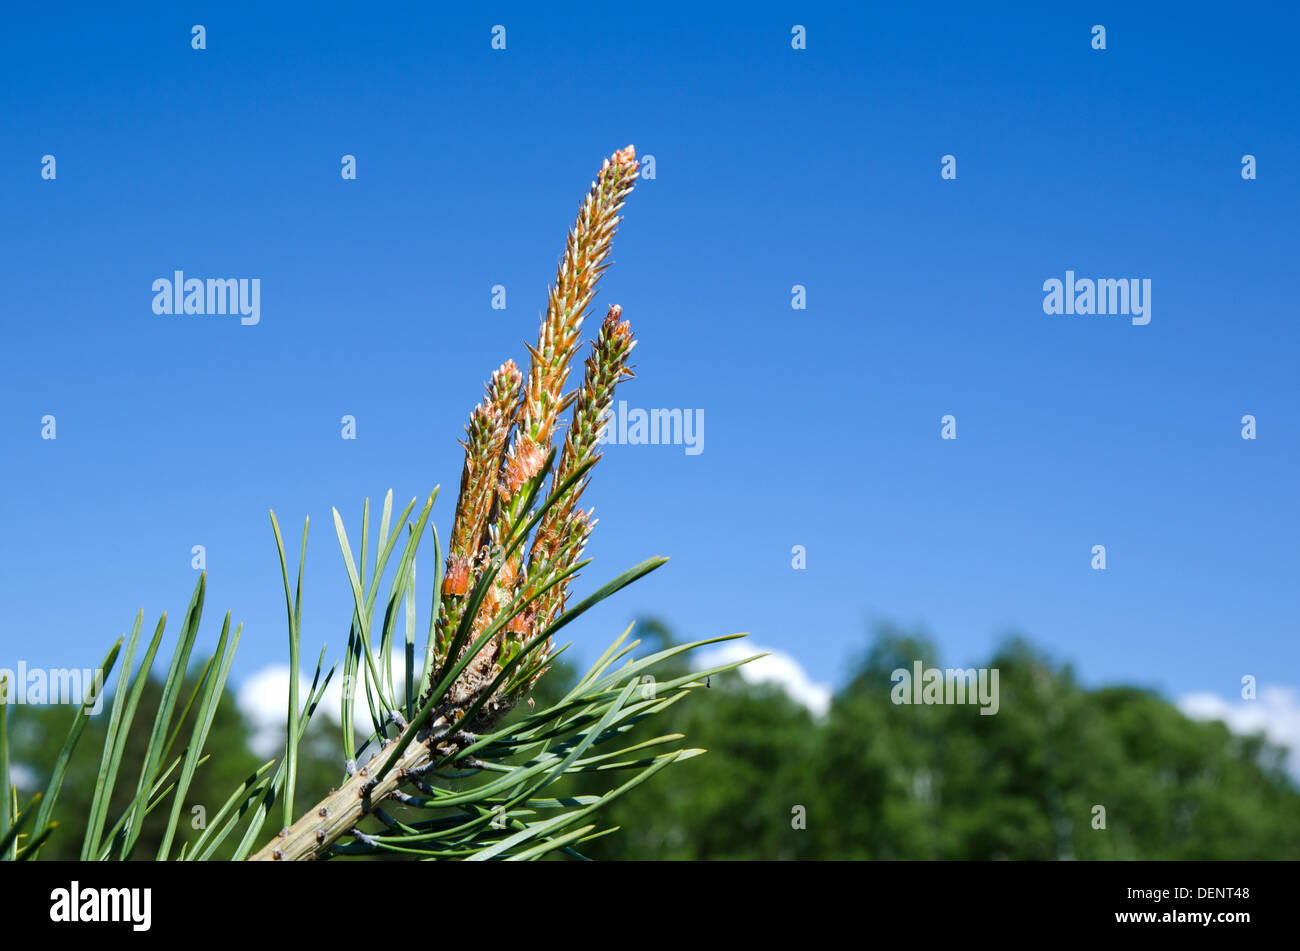 Pine tree shoots at a clear blue sky. Stock Photo